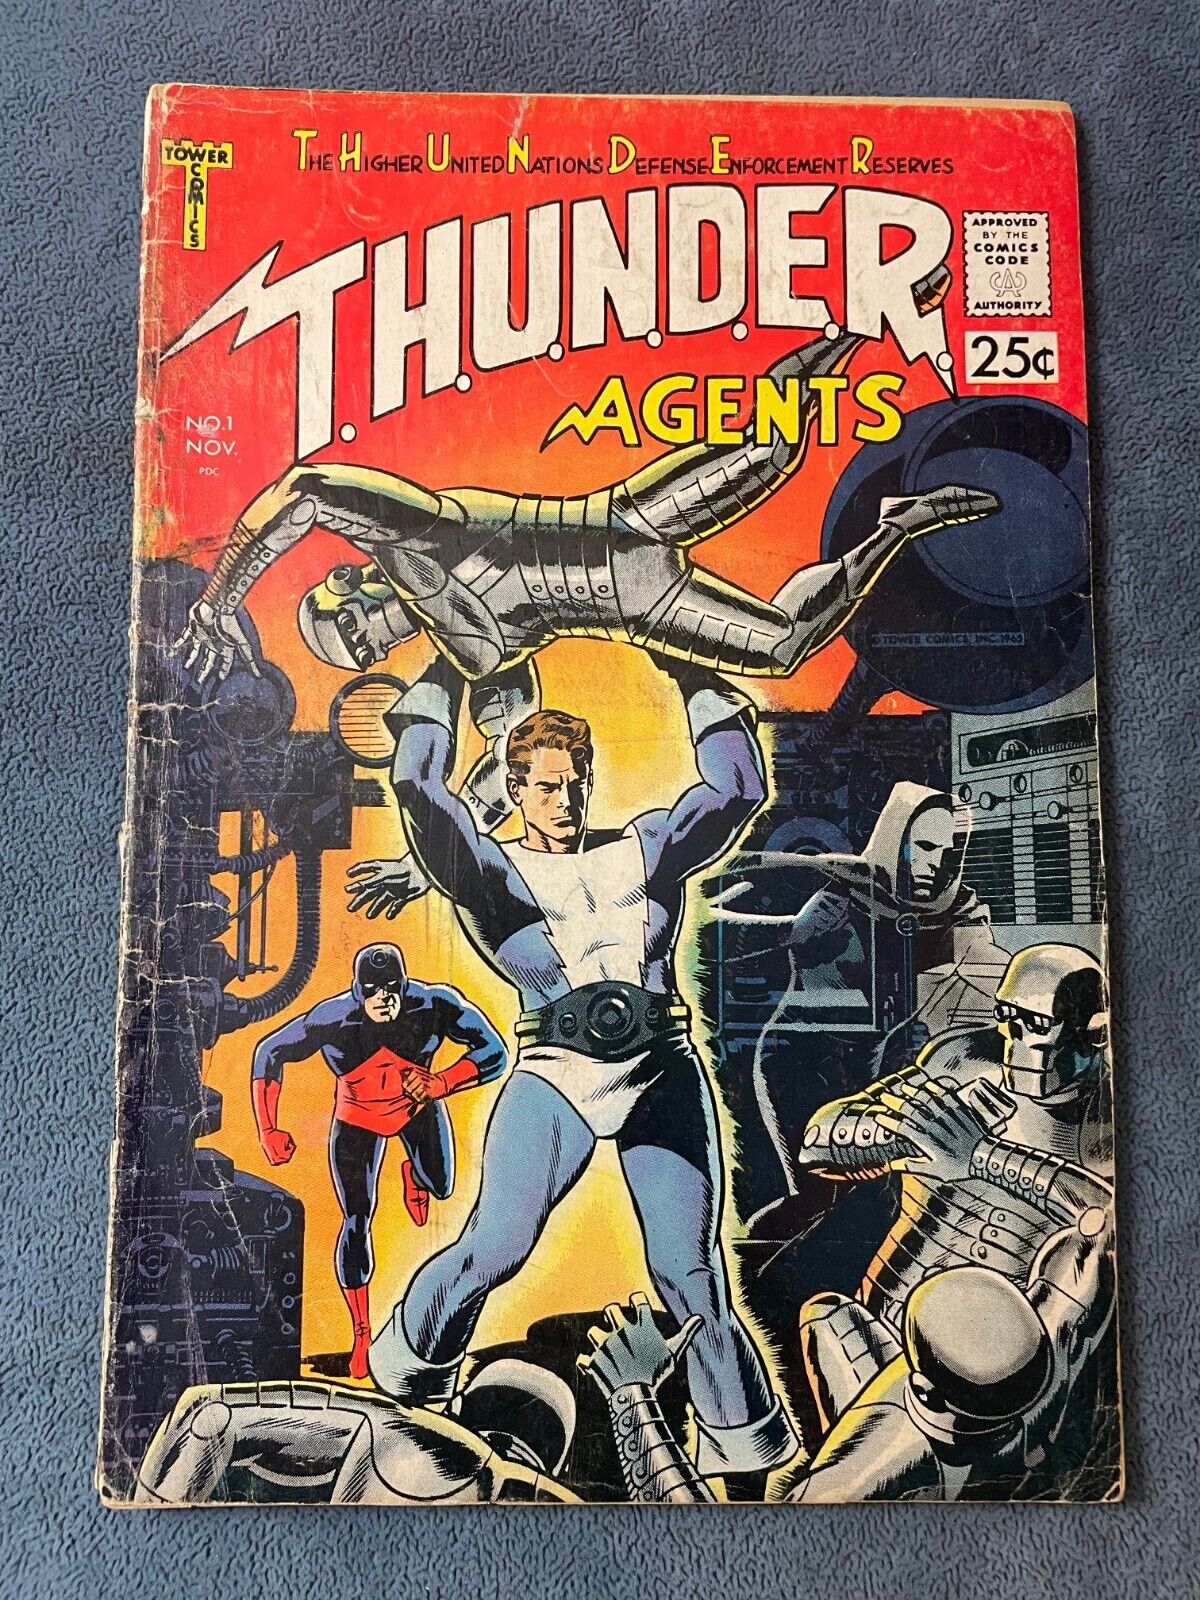 THUNDER Agents #1 1965 Tower Comic Book Wally Wood First Issue Low Grade Reader